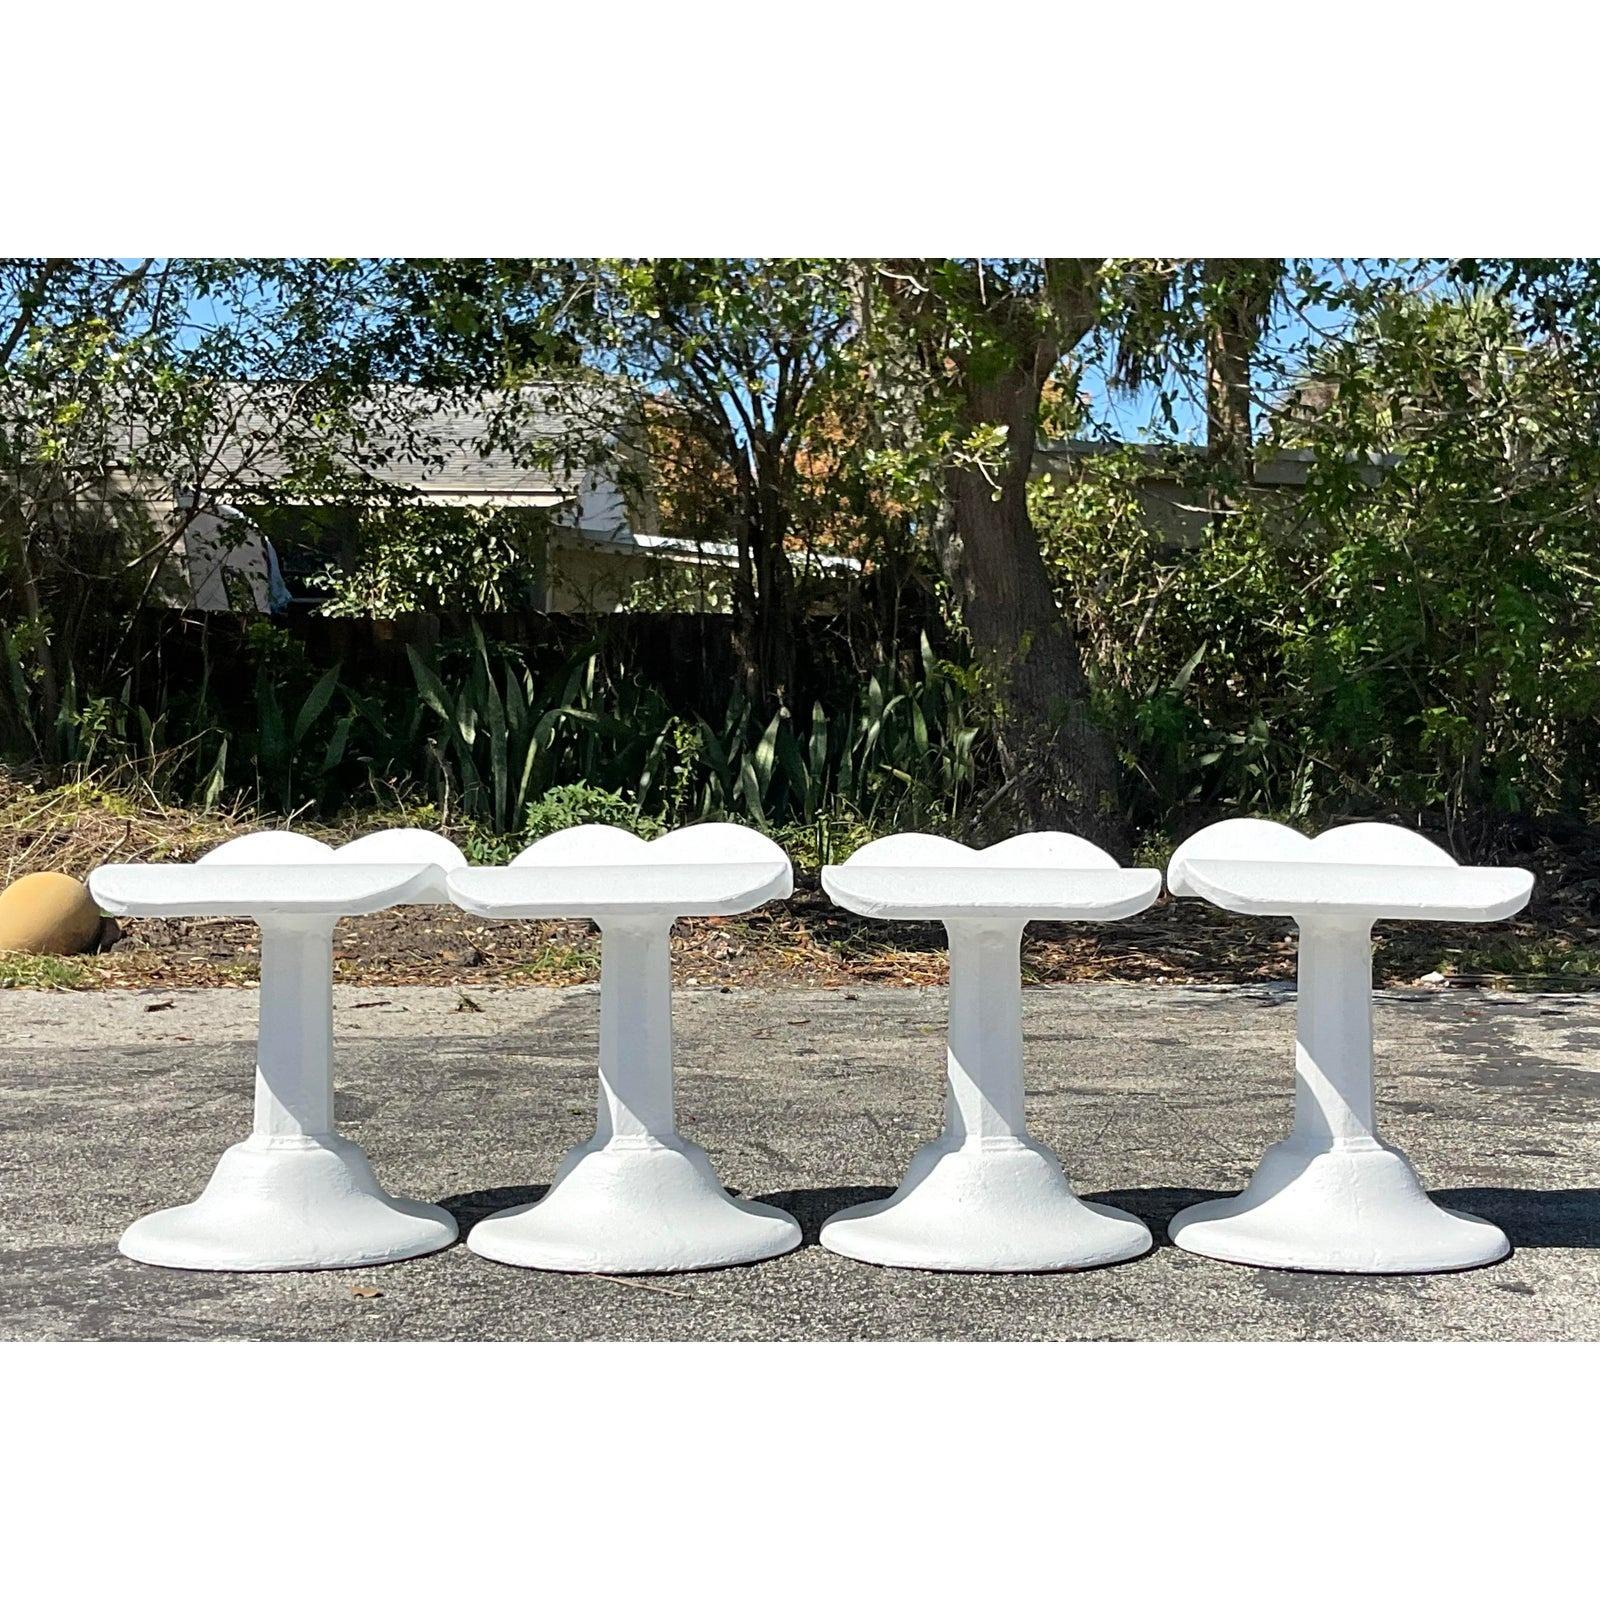 Vintage Boho Cast Concrete Low Stools After Dorothy Draper - Set of 4 In Good Condition For Sale In west palm beach, FL